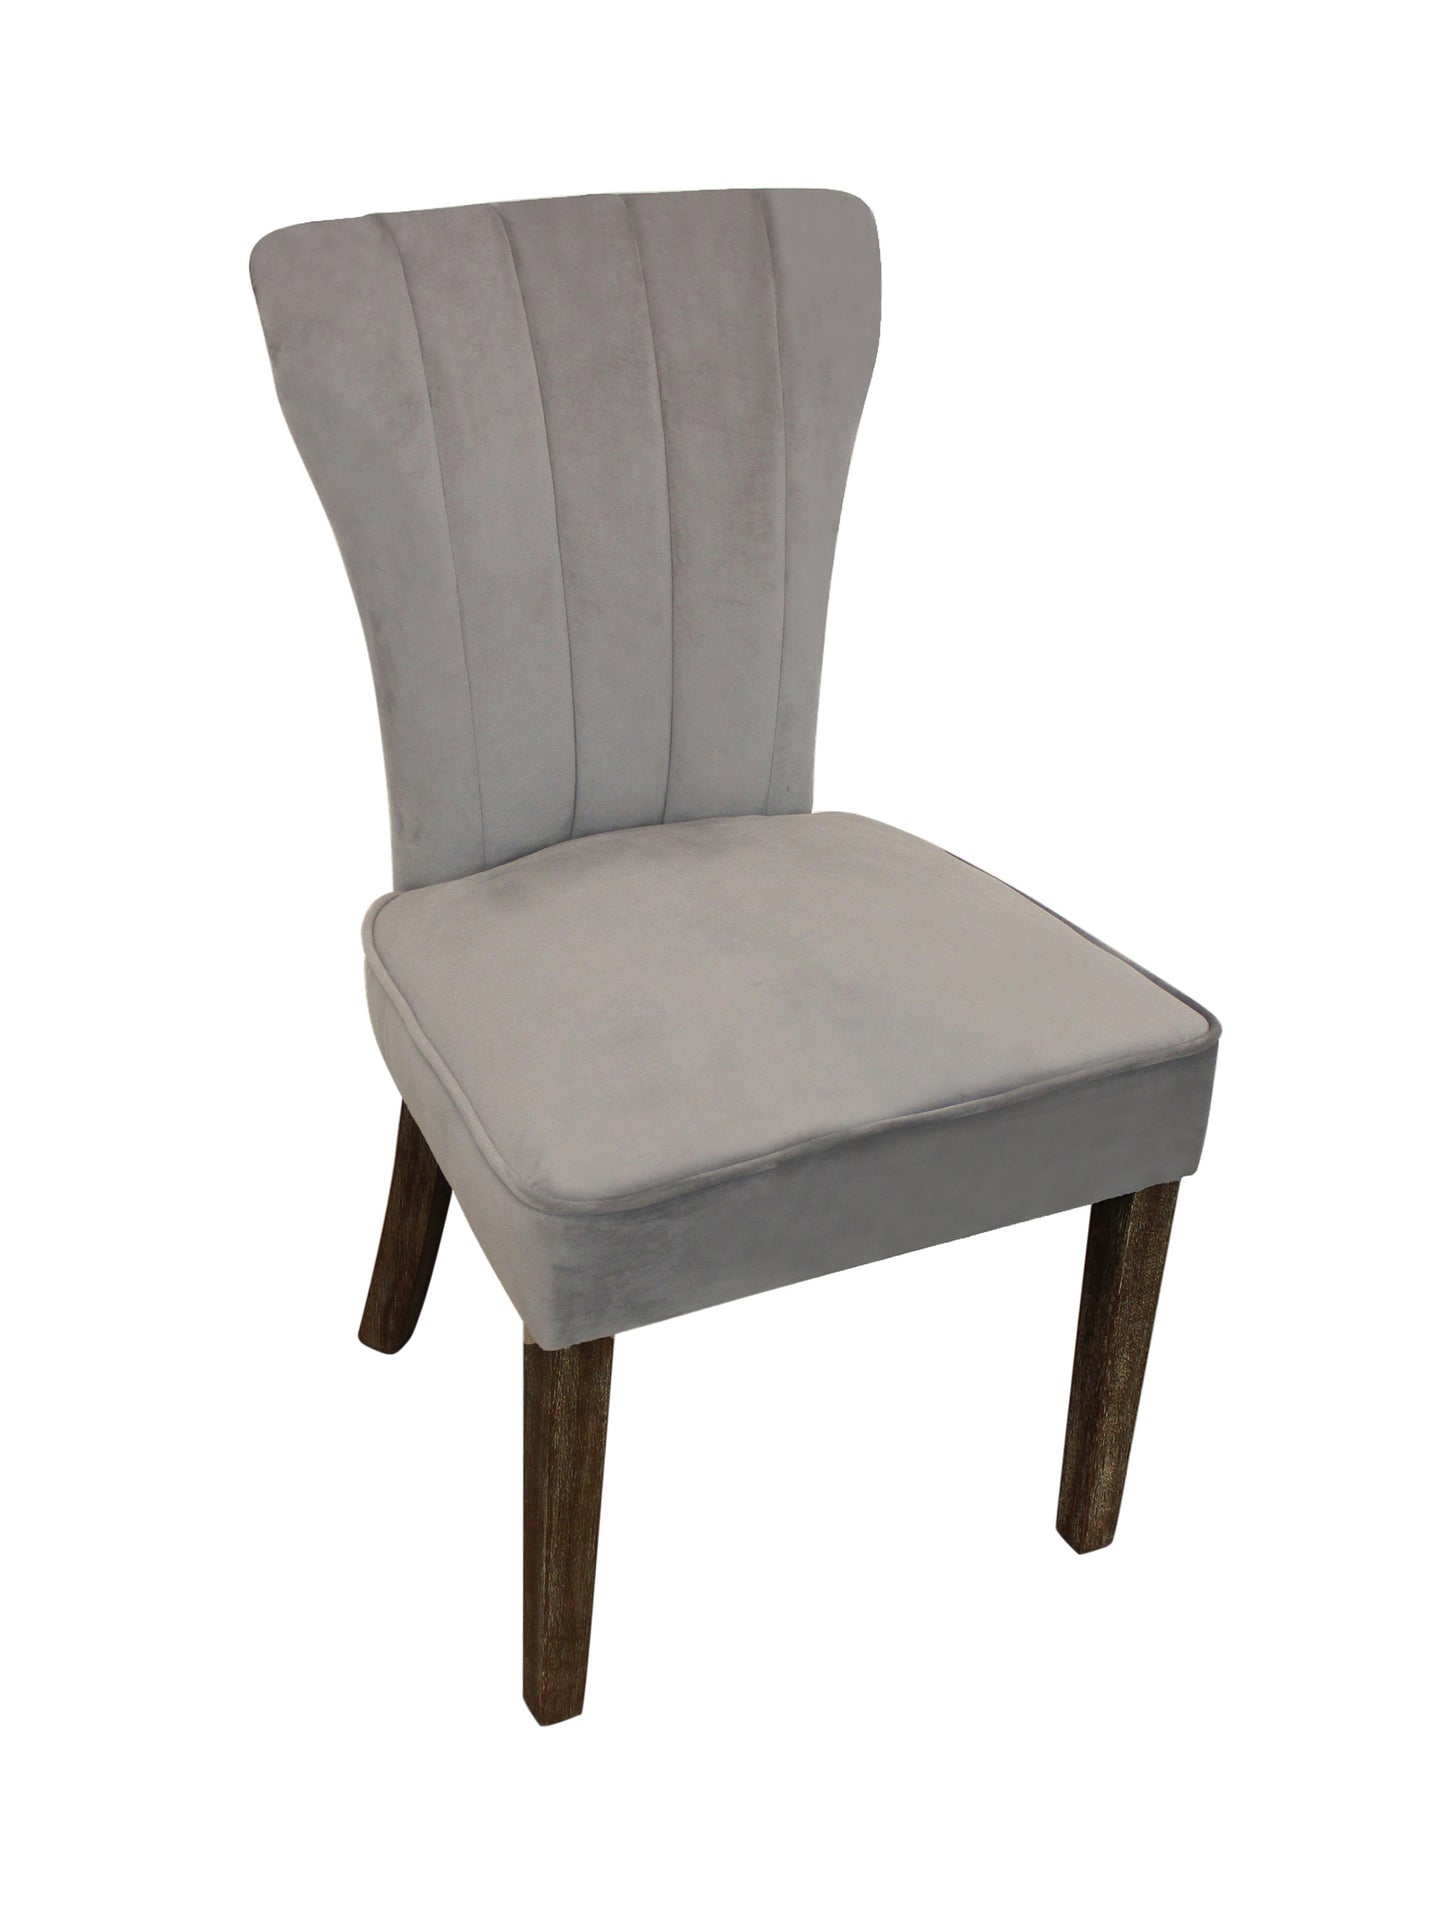 Eclectic Home Dining Chair Clive Mink